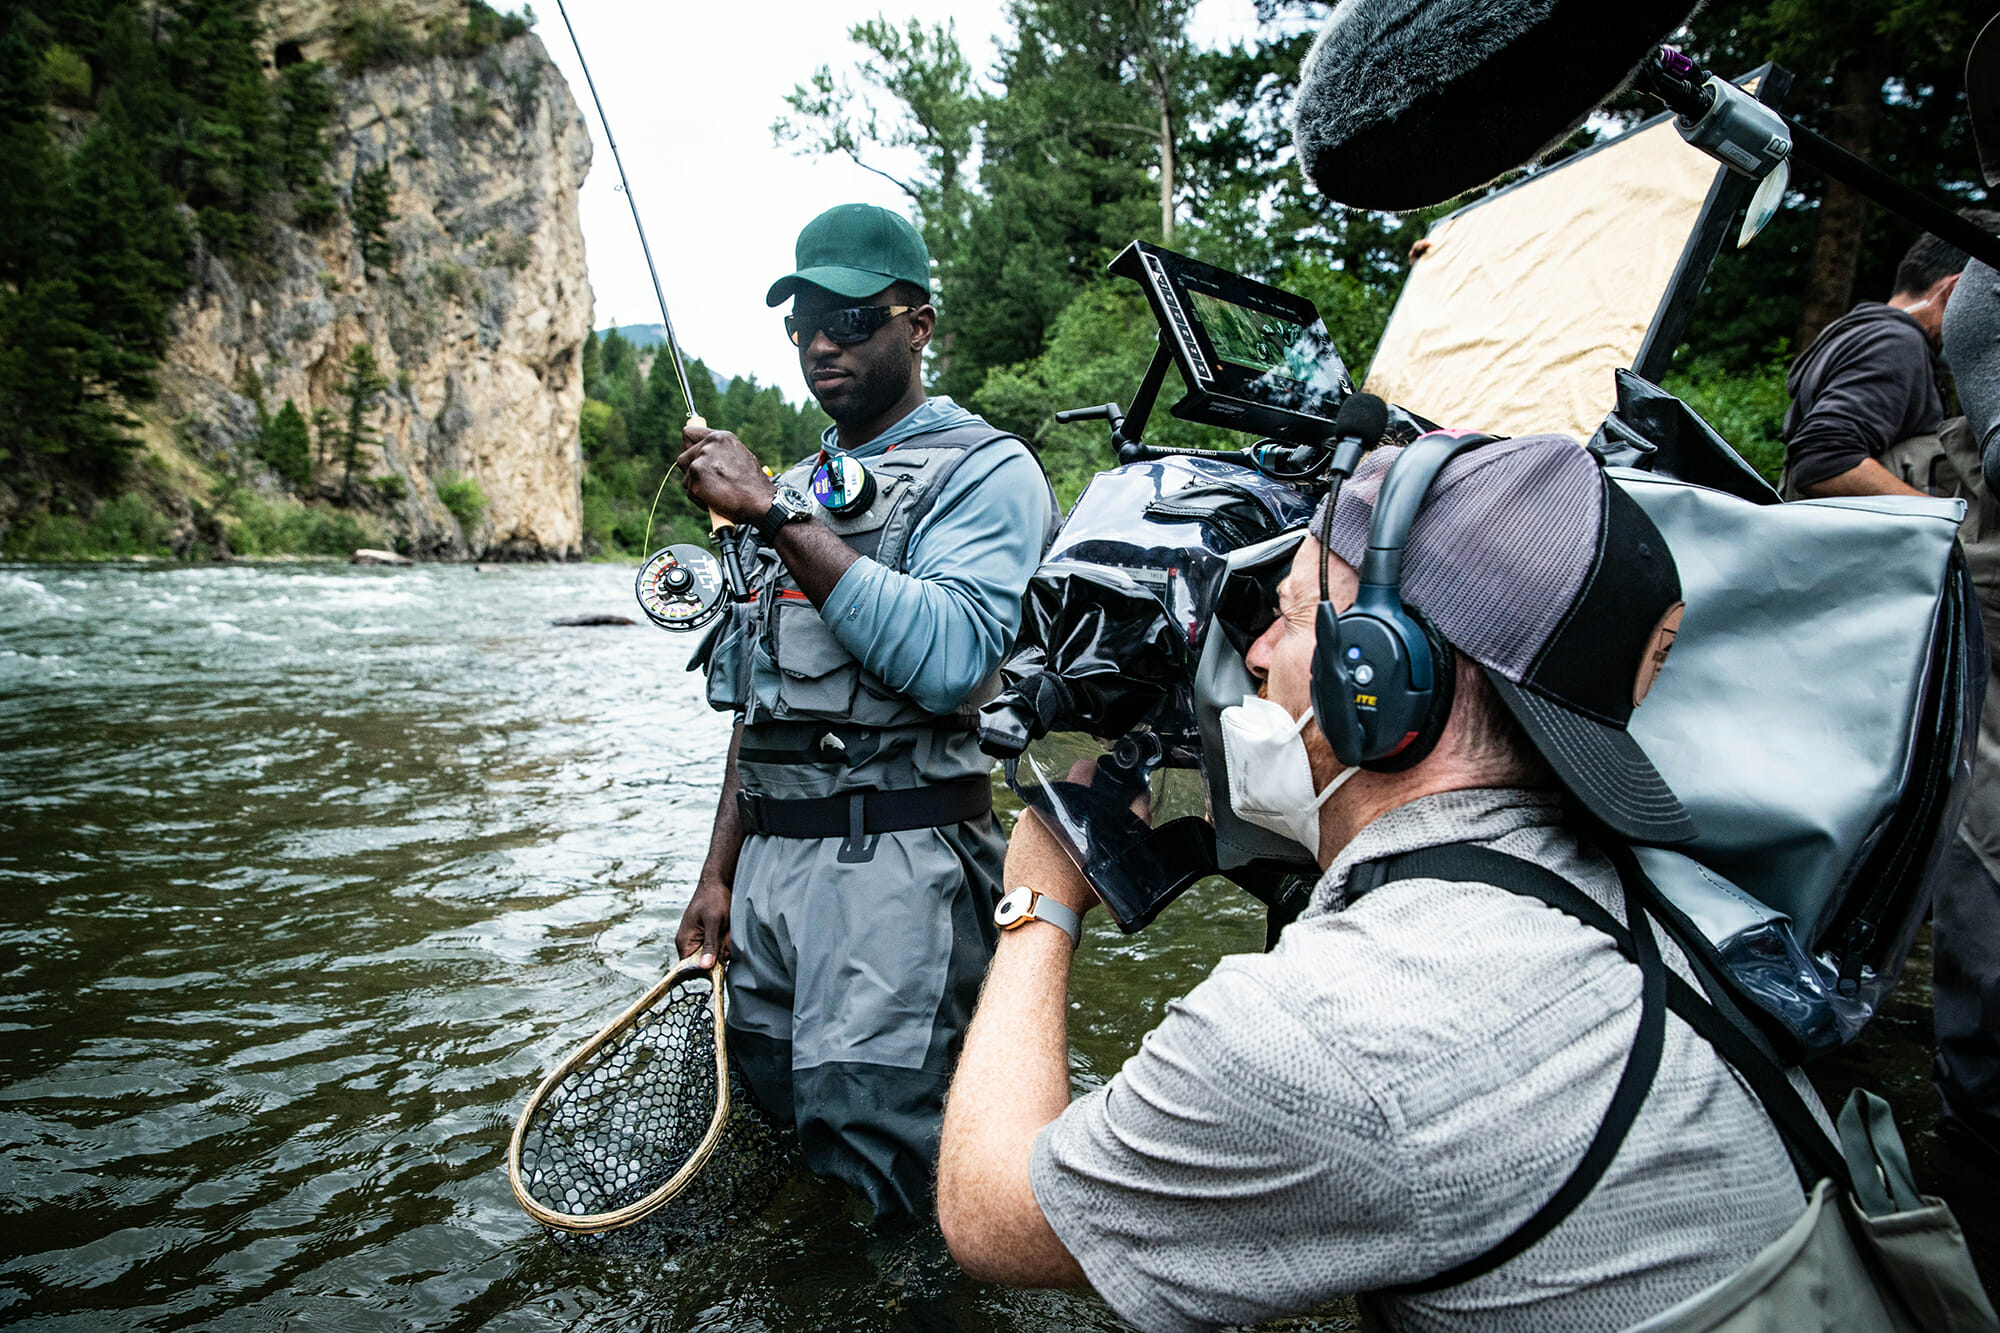 Camera man shoots actor with rod and net in a river